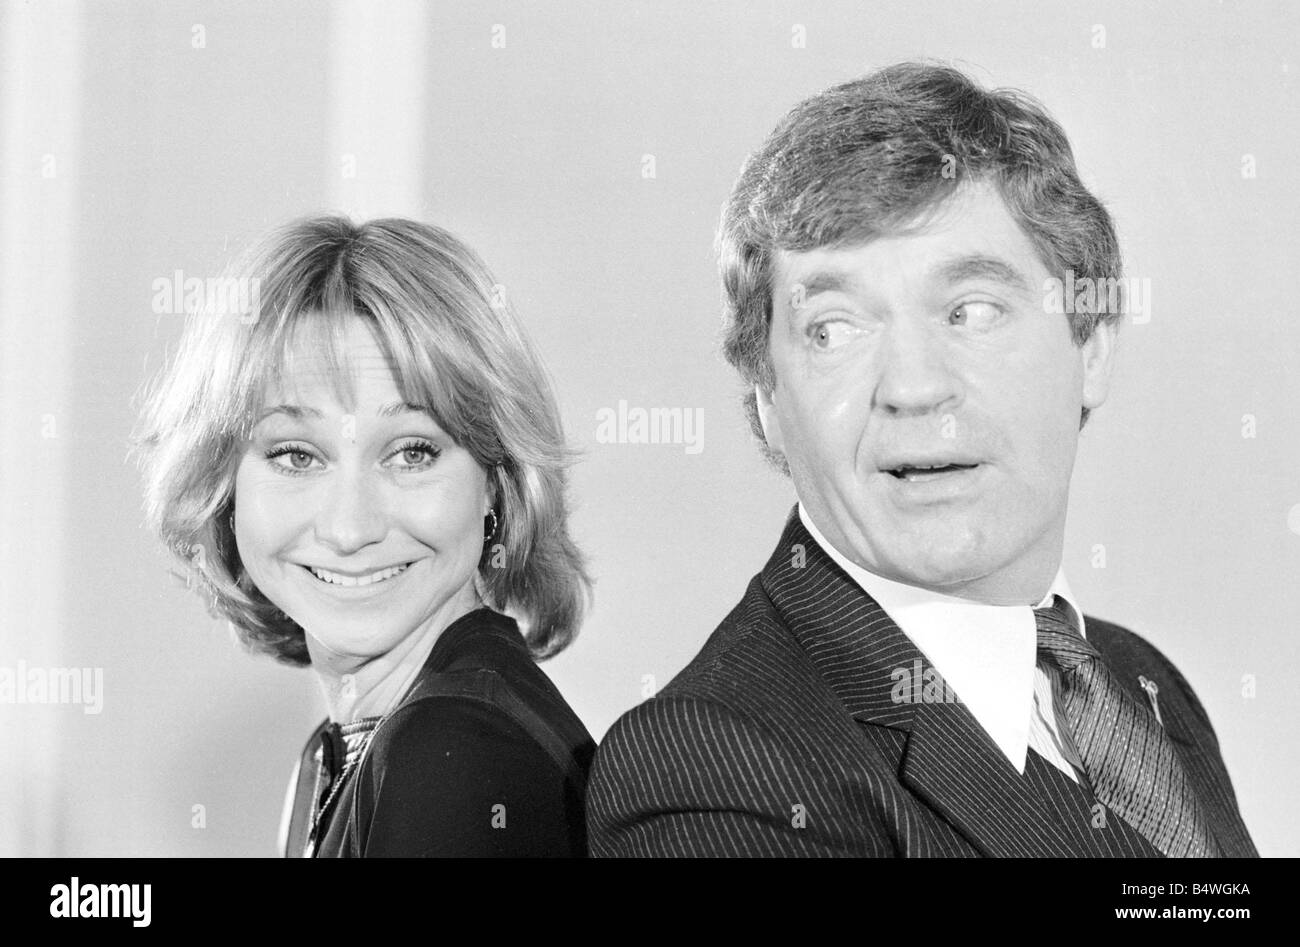 Felicity Kendal And Lawrie Mcmenemy March 1981 Who Shared The National